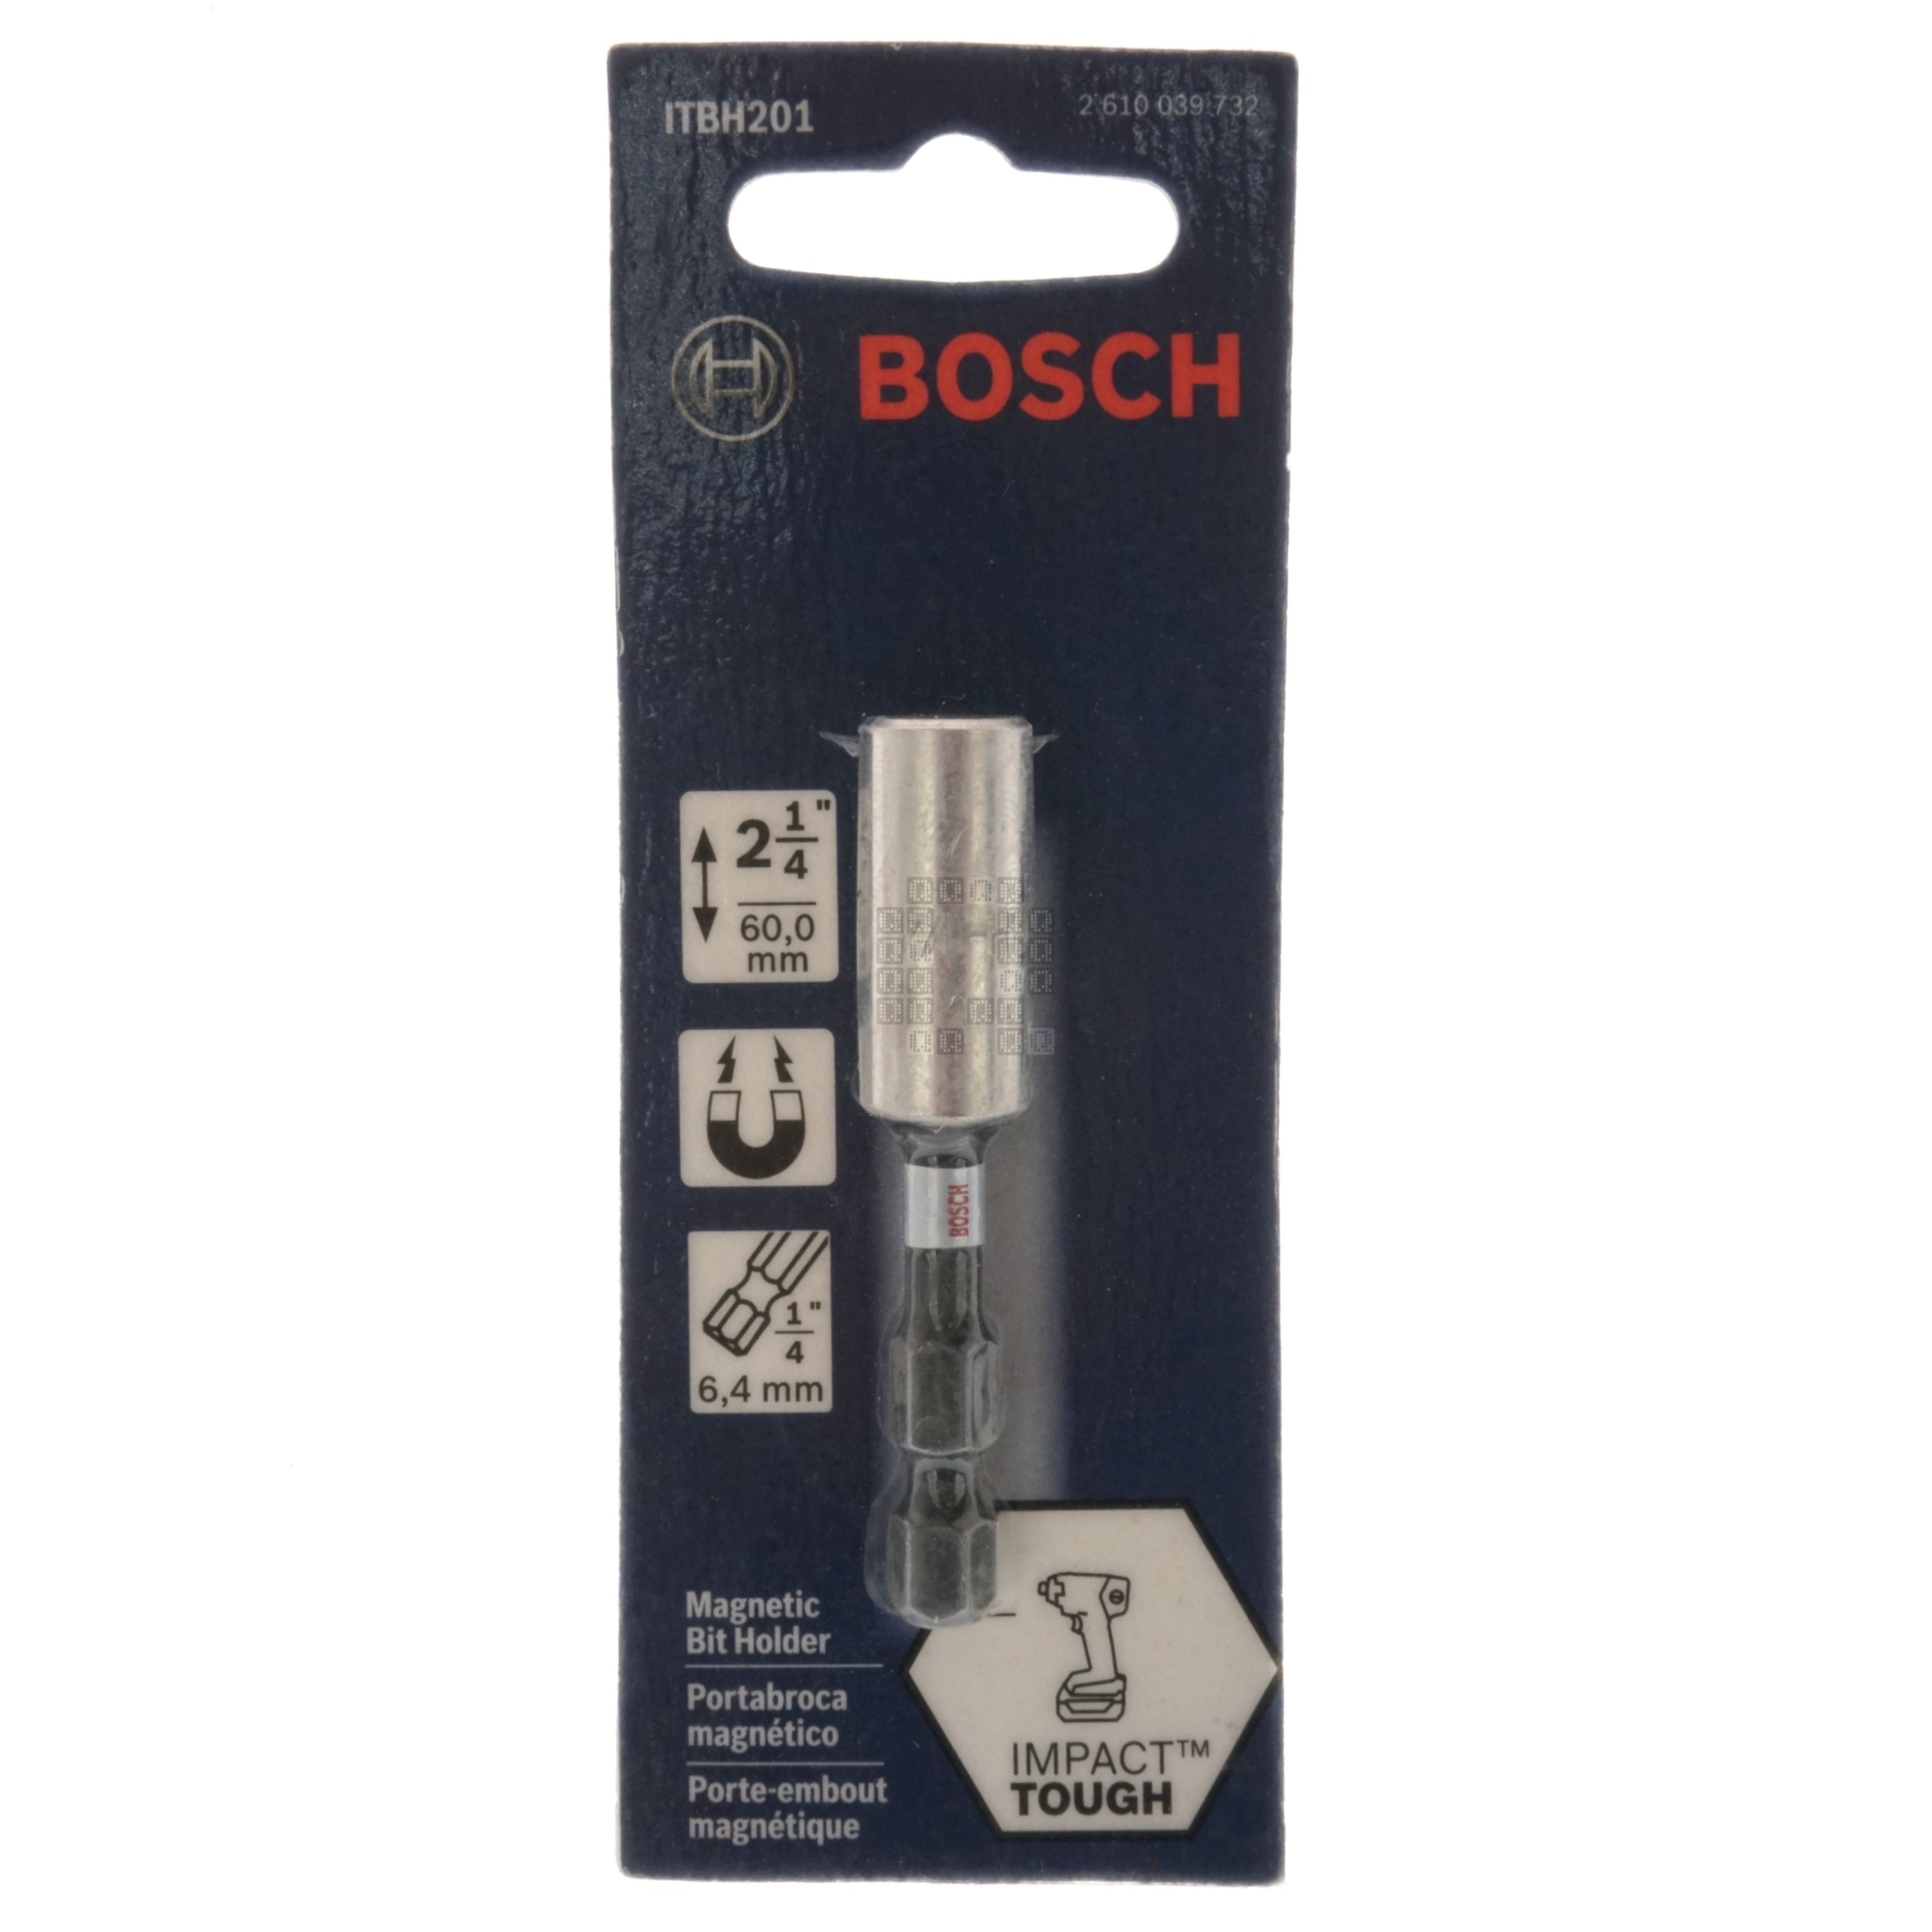 Bosch ITBH201 2610039732 1/4" Hex Impact Tough Magnetic Bit Holder, 2.25" Length